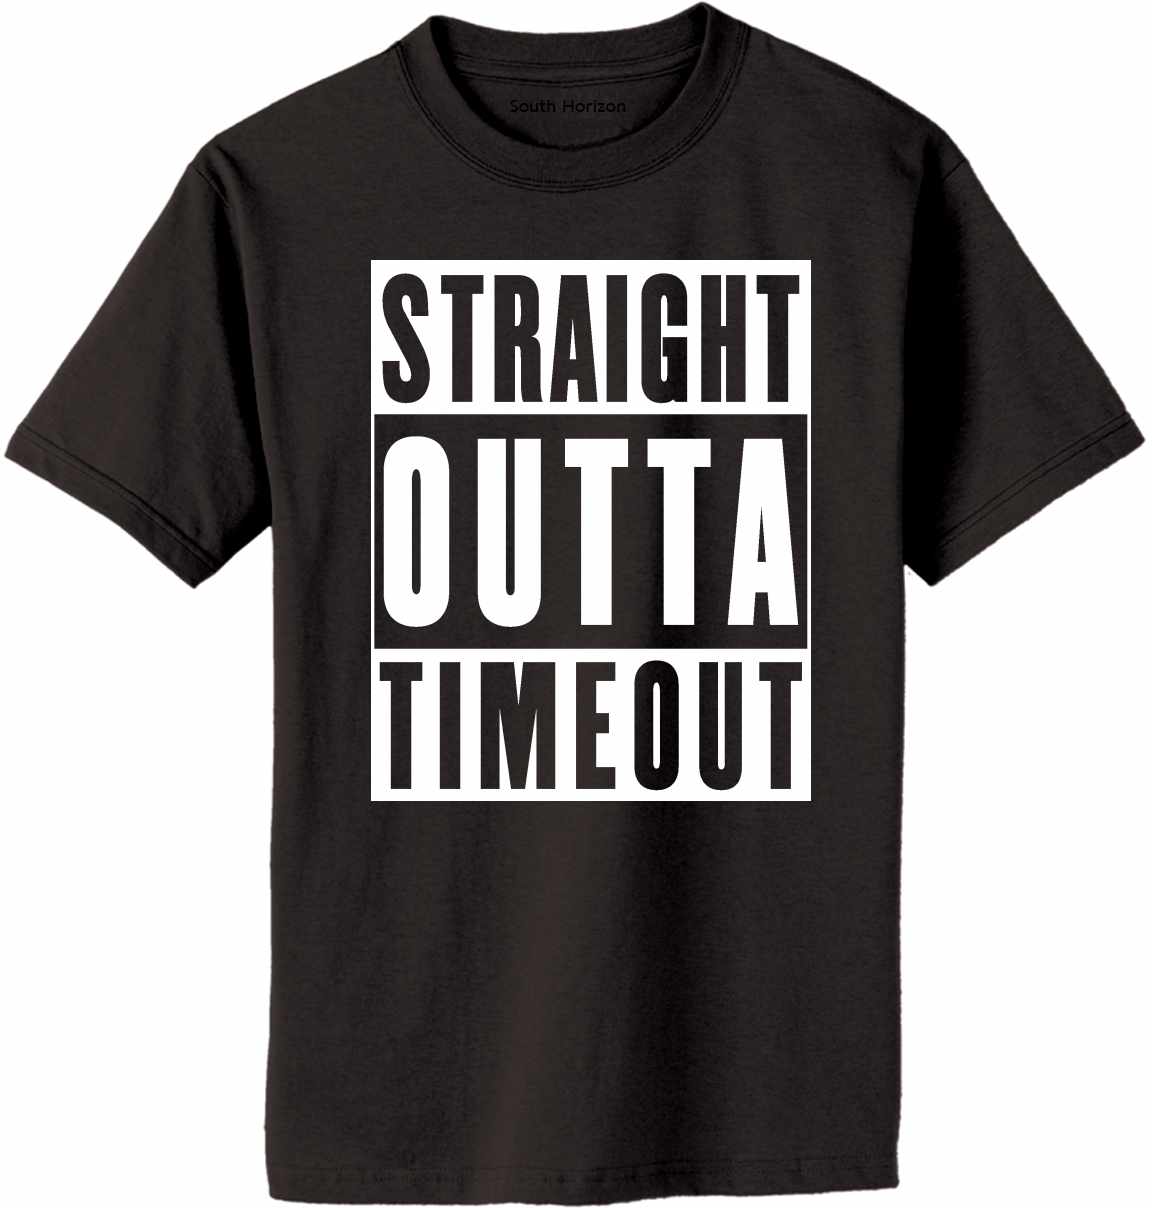 Straight Outta TimeOut Adult T-Shirt